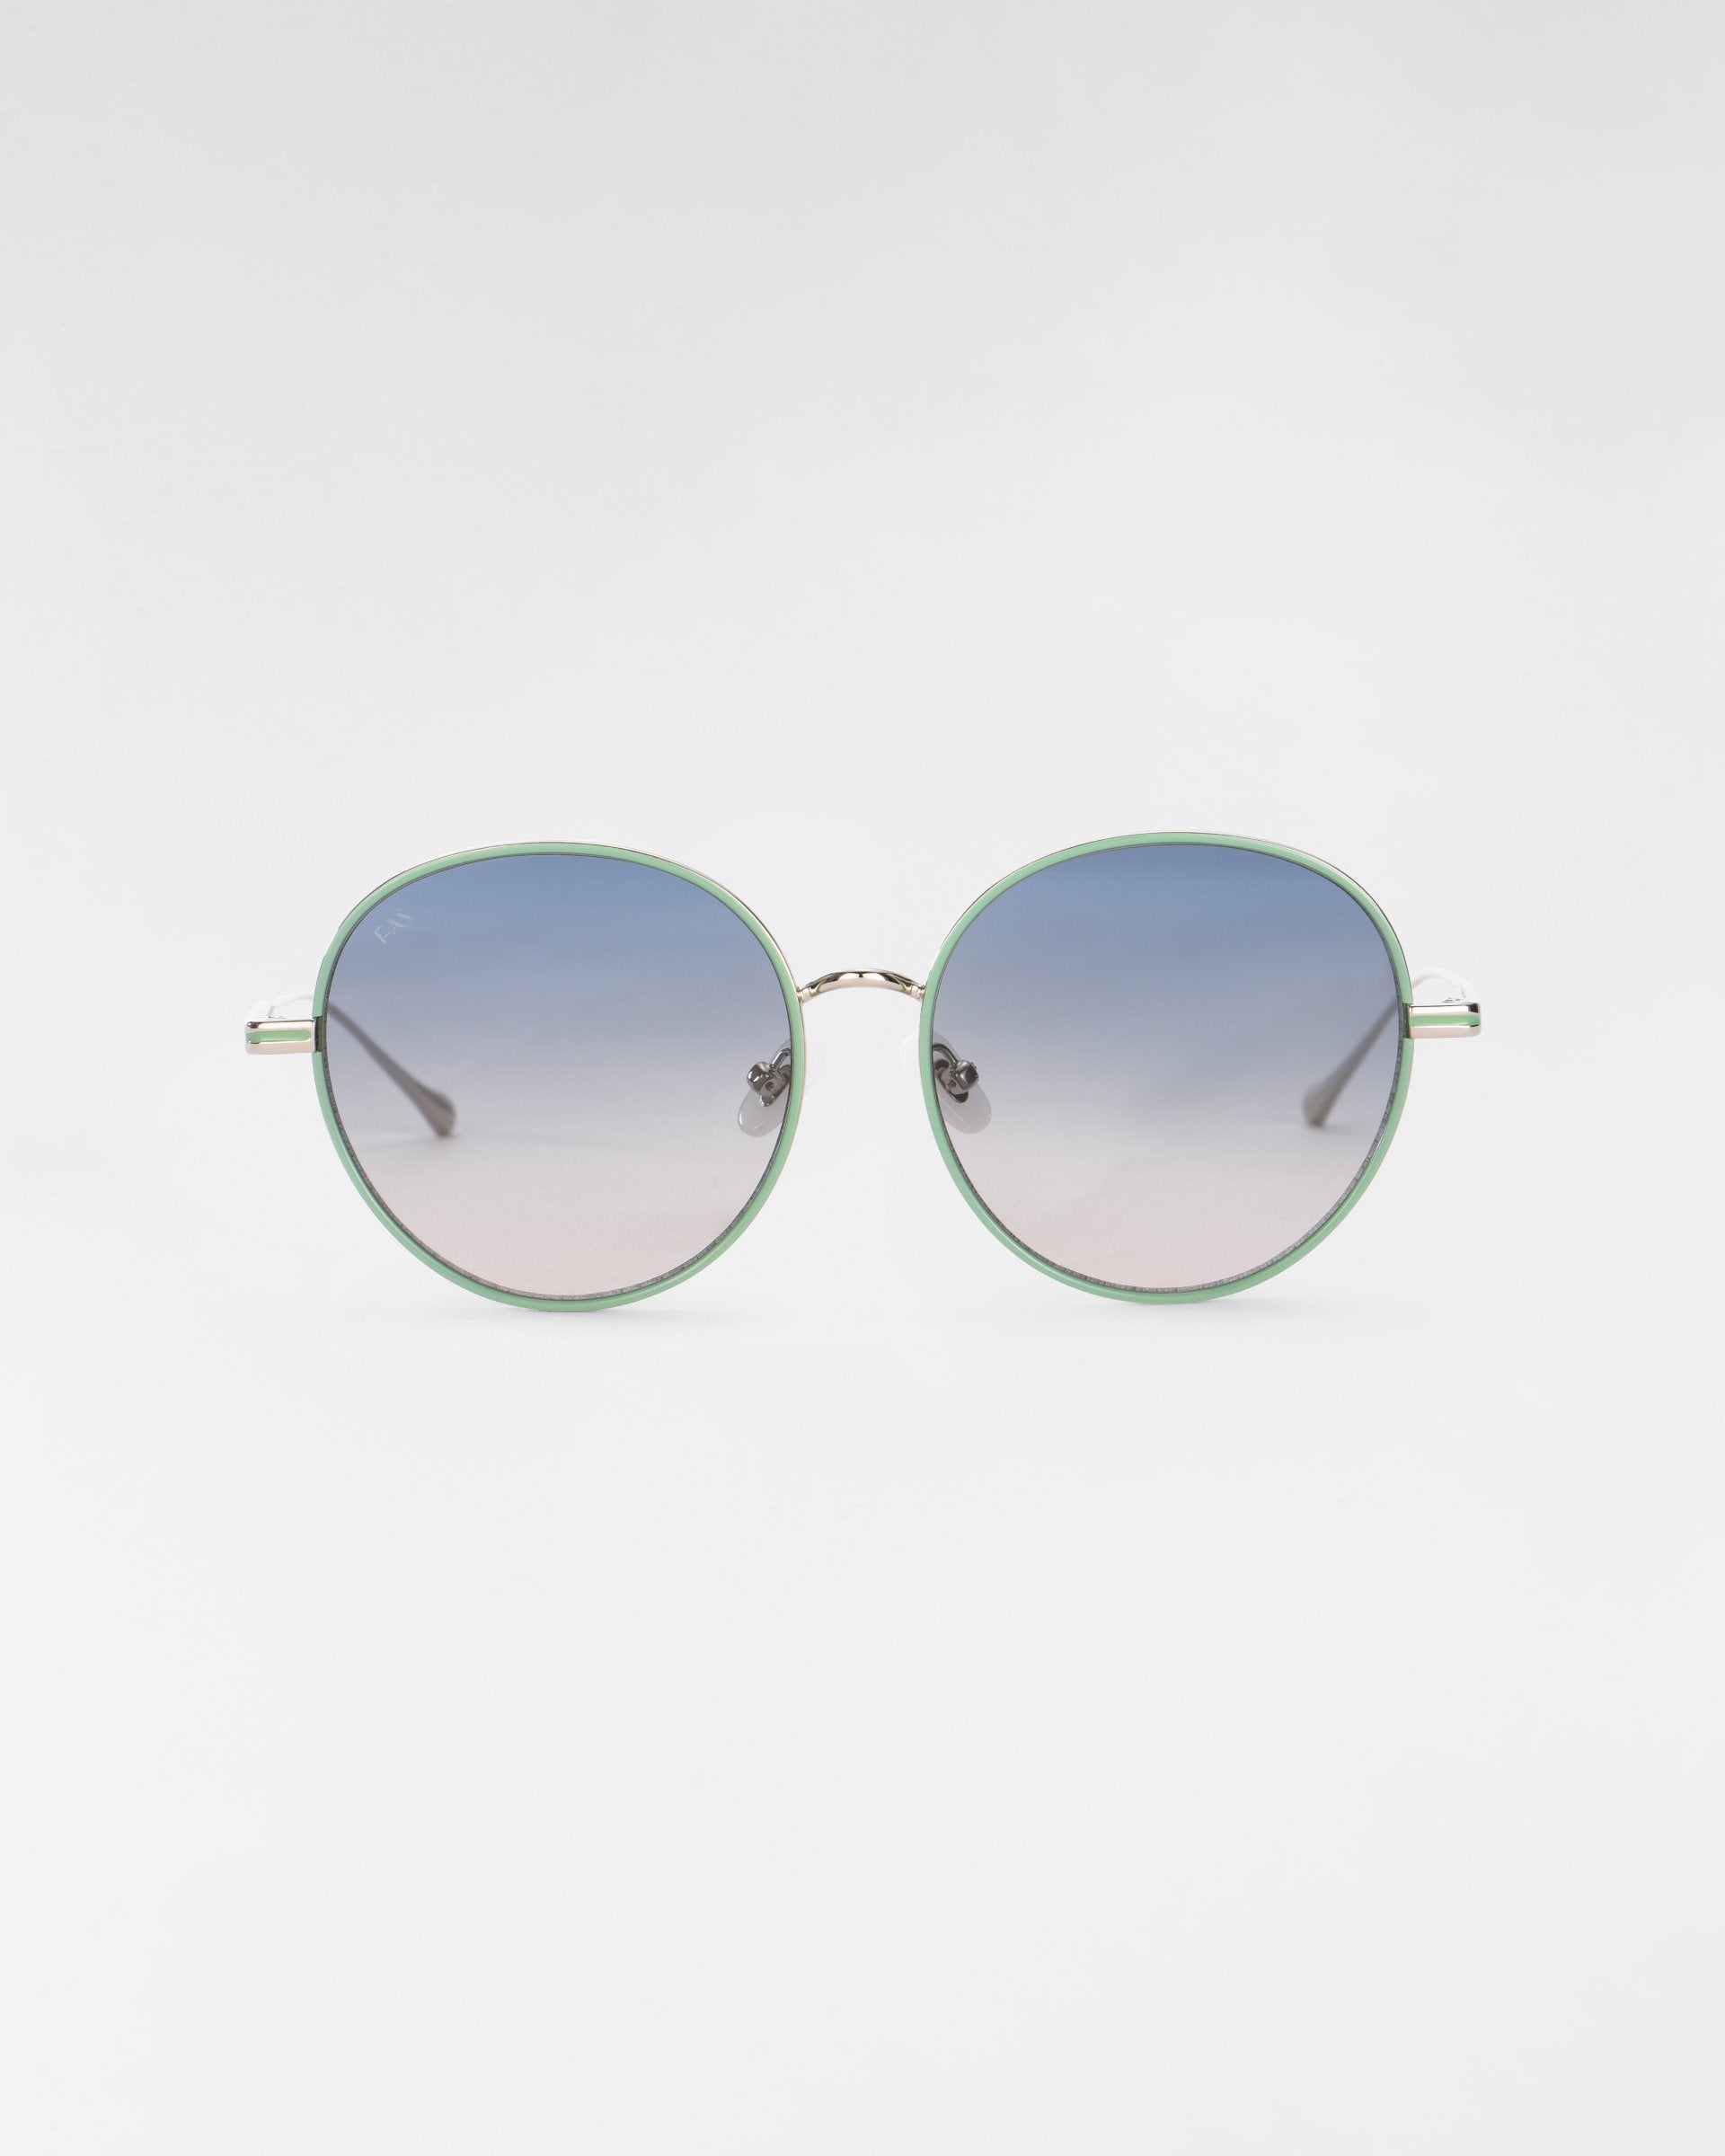 A pair of round For Art&#39;s Sake® Lemon sunglasses with green frames and blue gradient lenses is displayed against a plain white background. The temples and nose bridge are metallic, featuring 18-karat gold plating, and the earpieces extend outwards in a straight line.